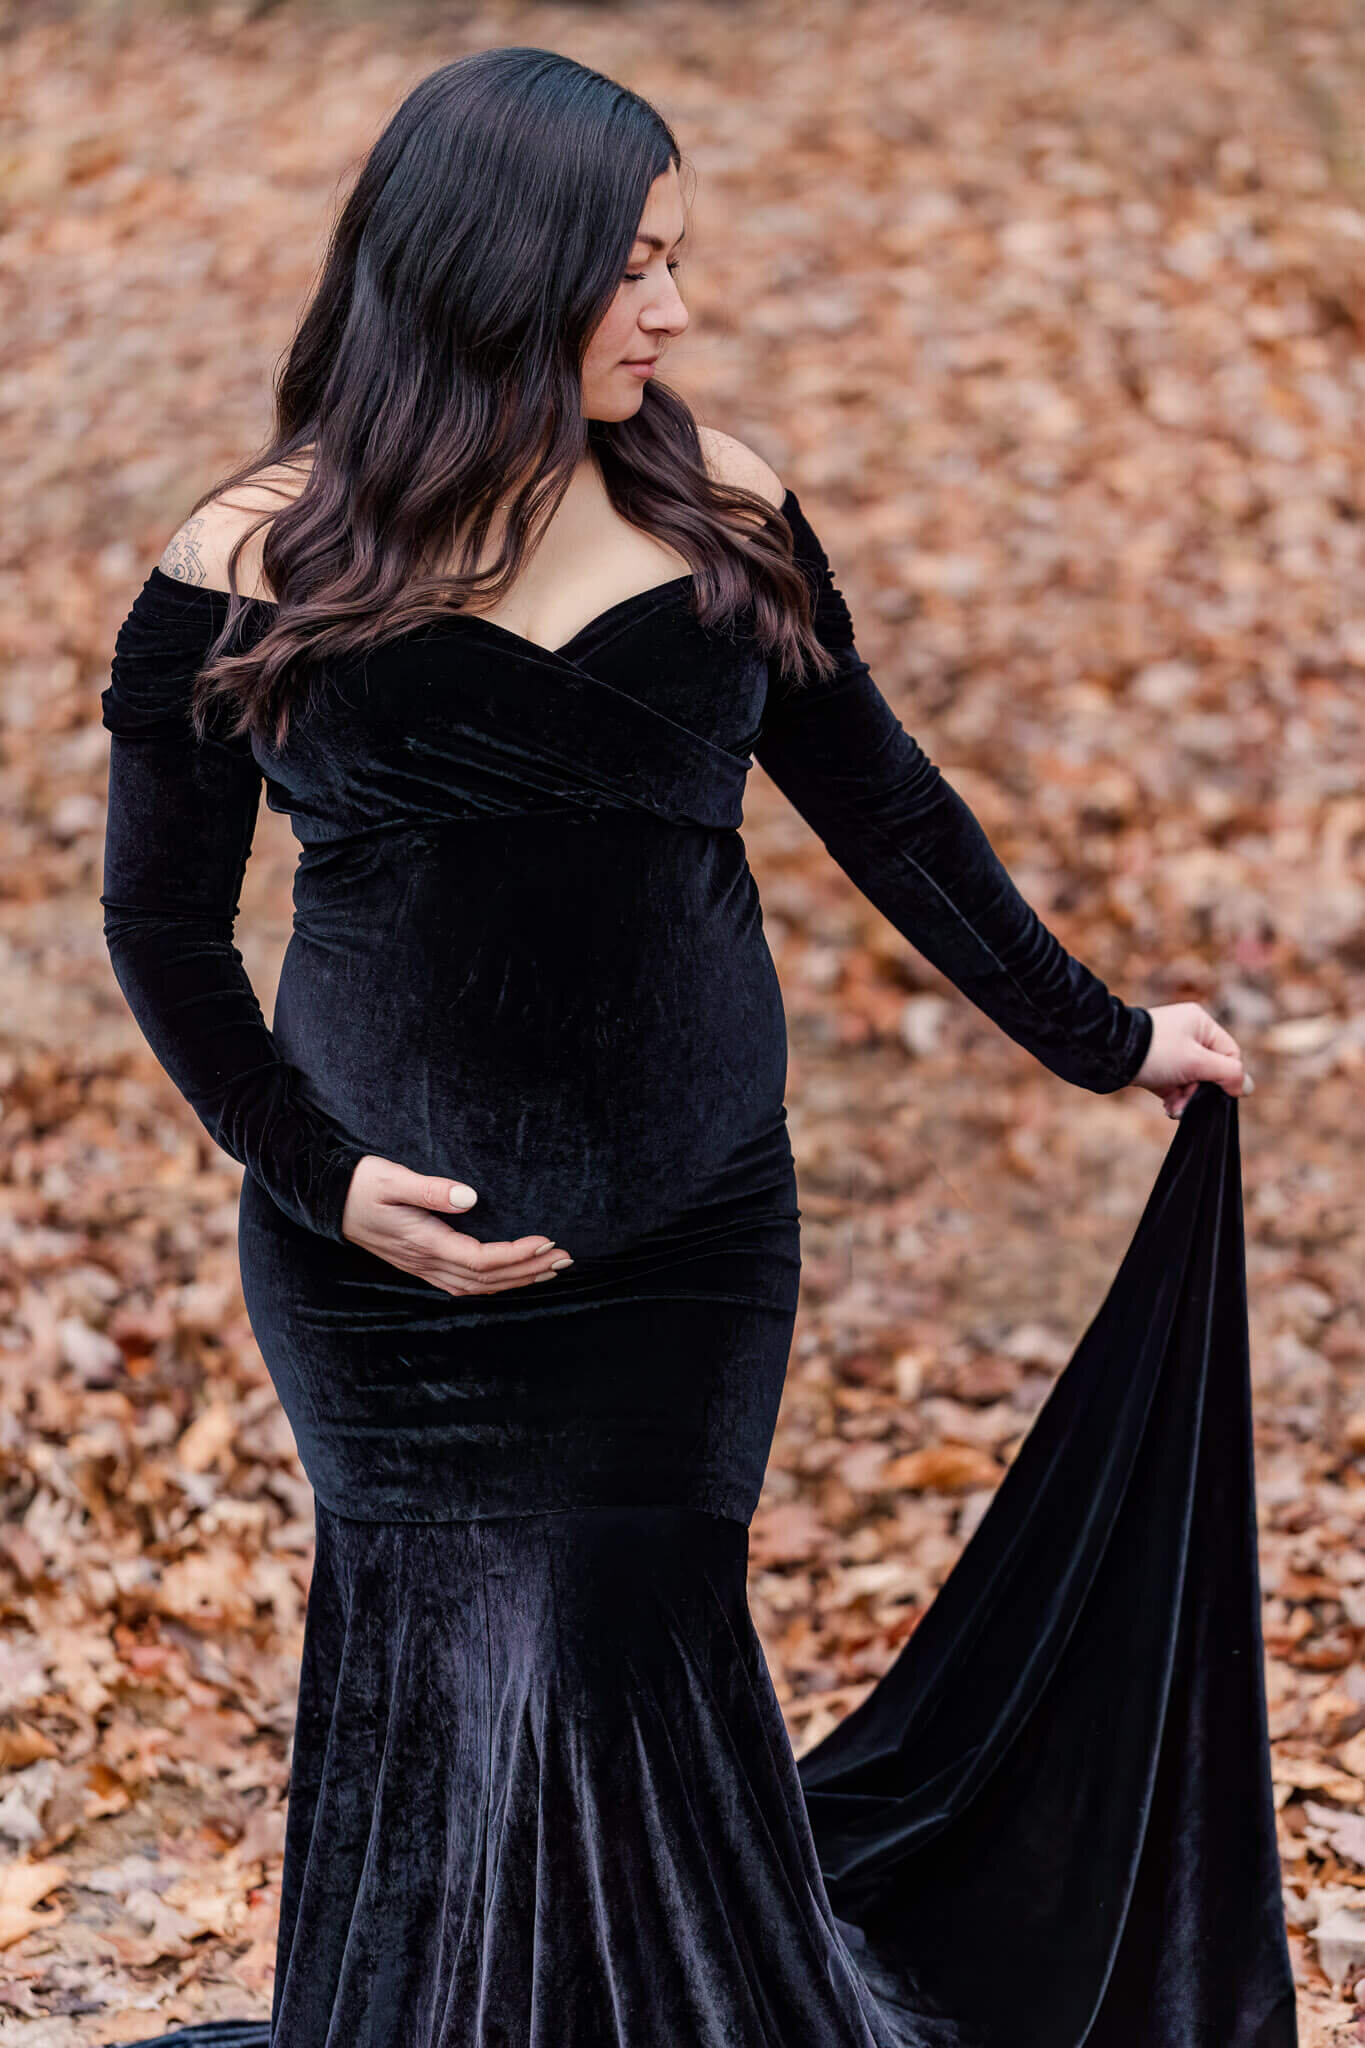 A mother-to-be posing in a black dress among the leaves at a park in the fall.